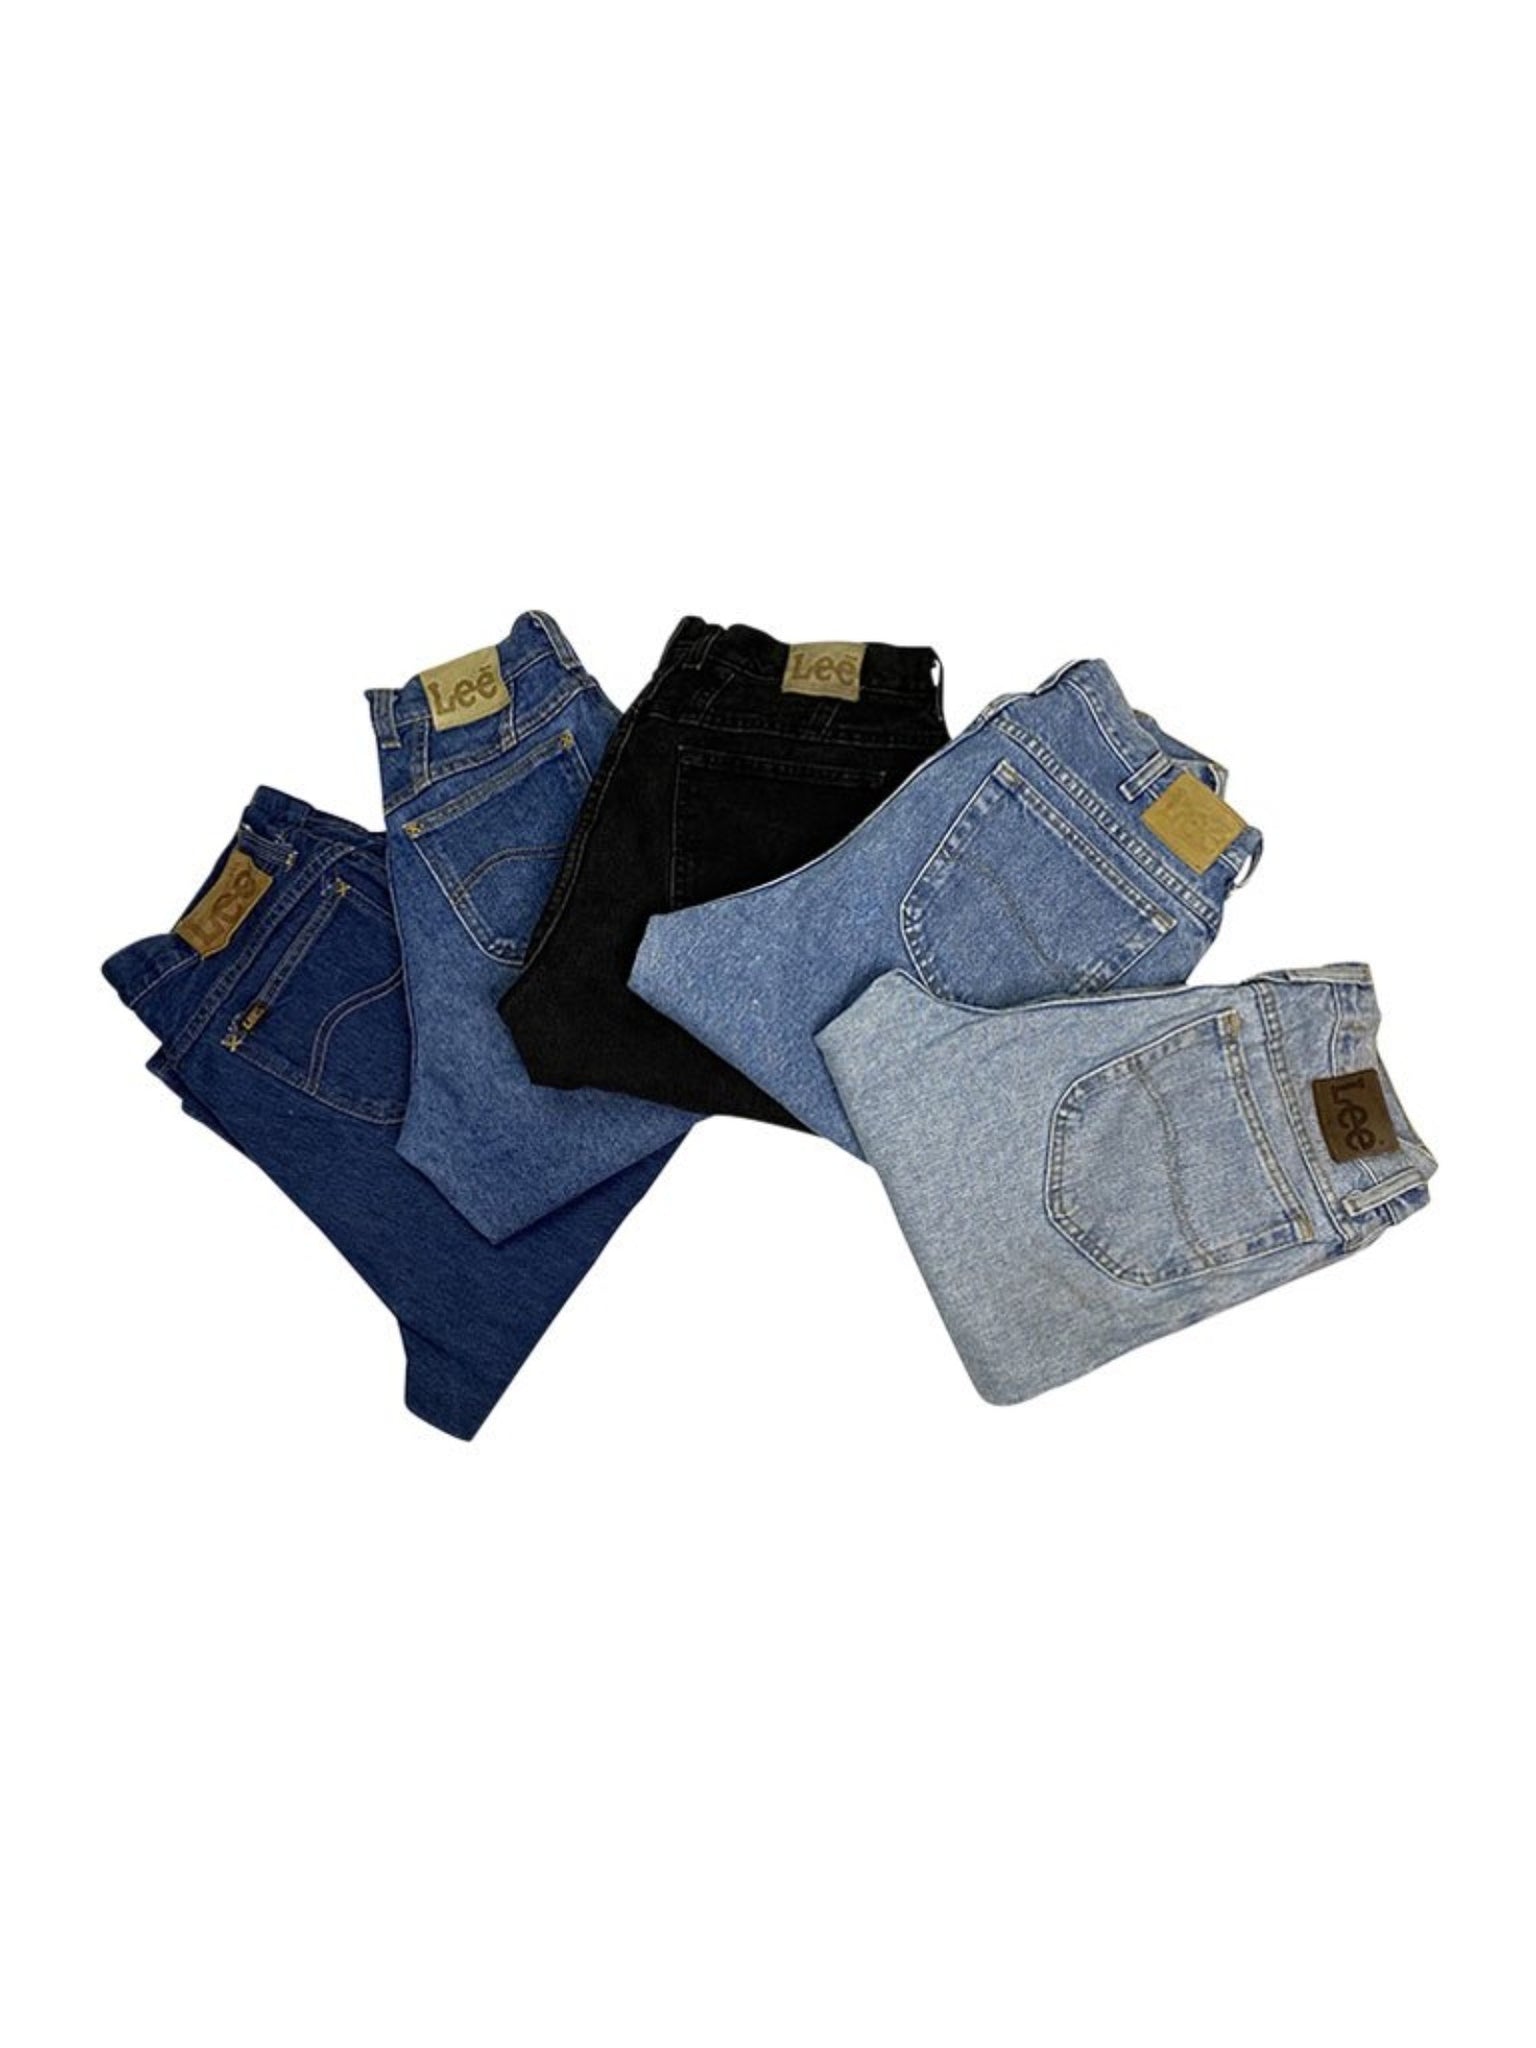 DVG jeans wholesaler (@jeanswholesaler.in) • Instagram photos and videos